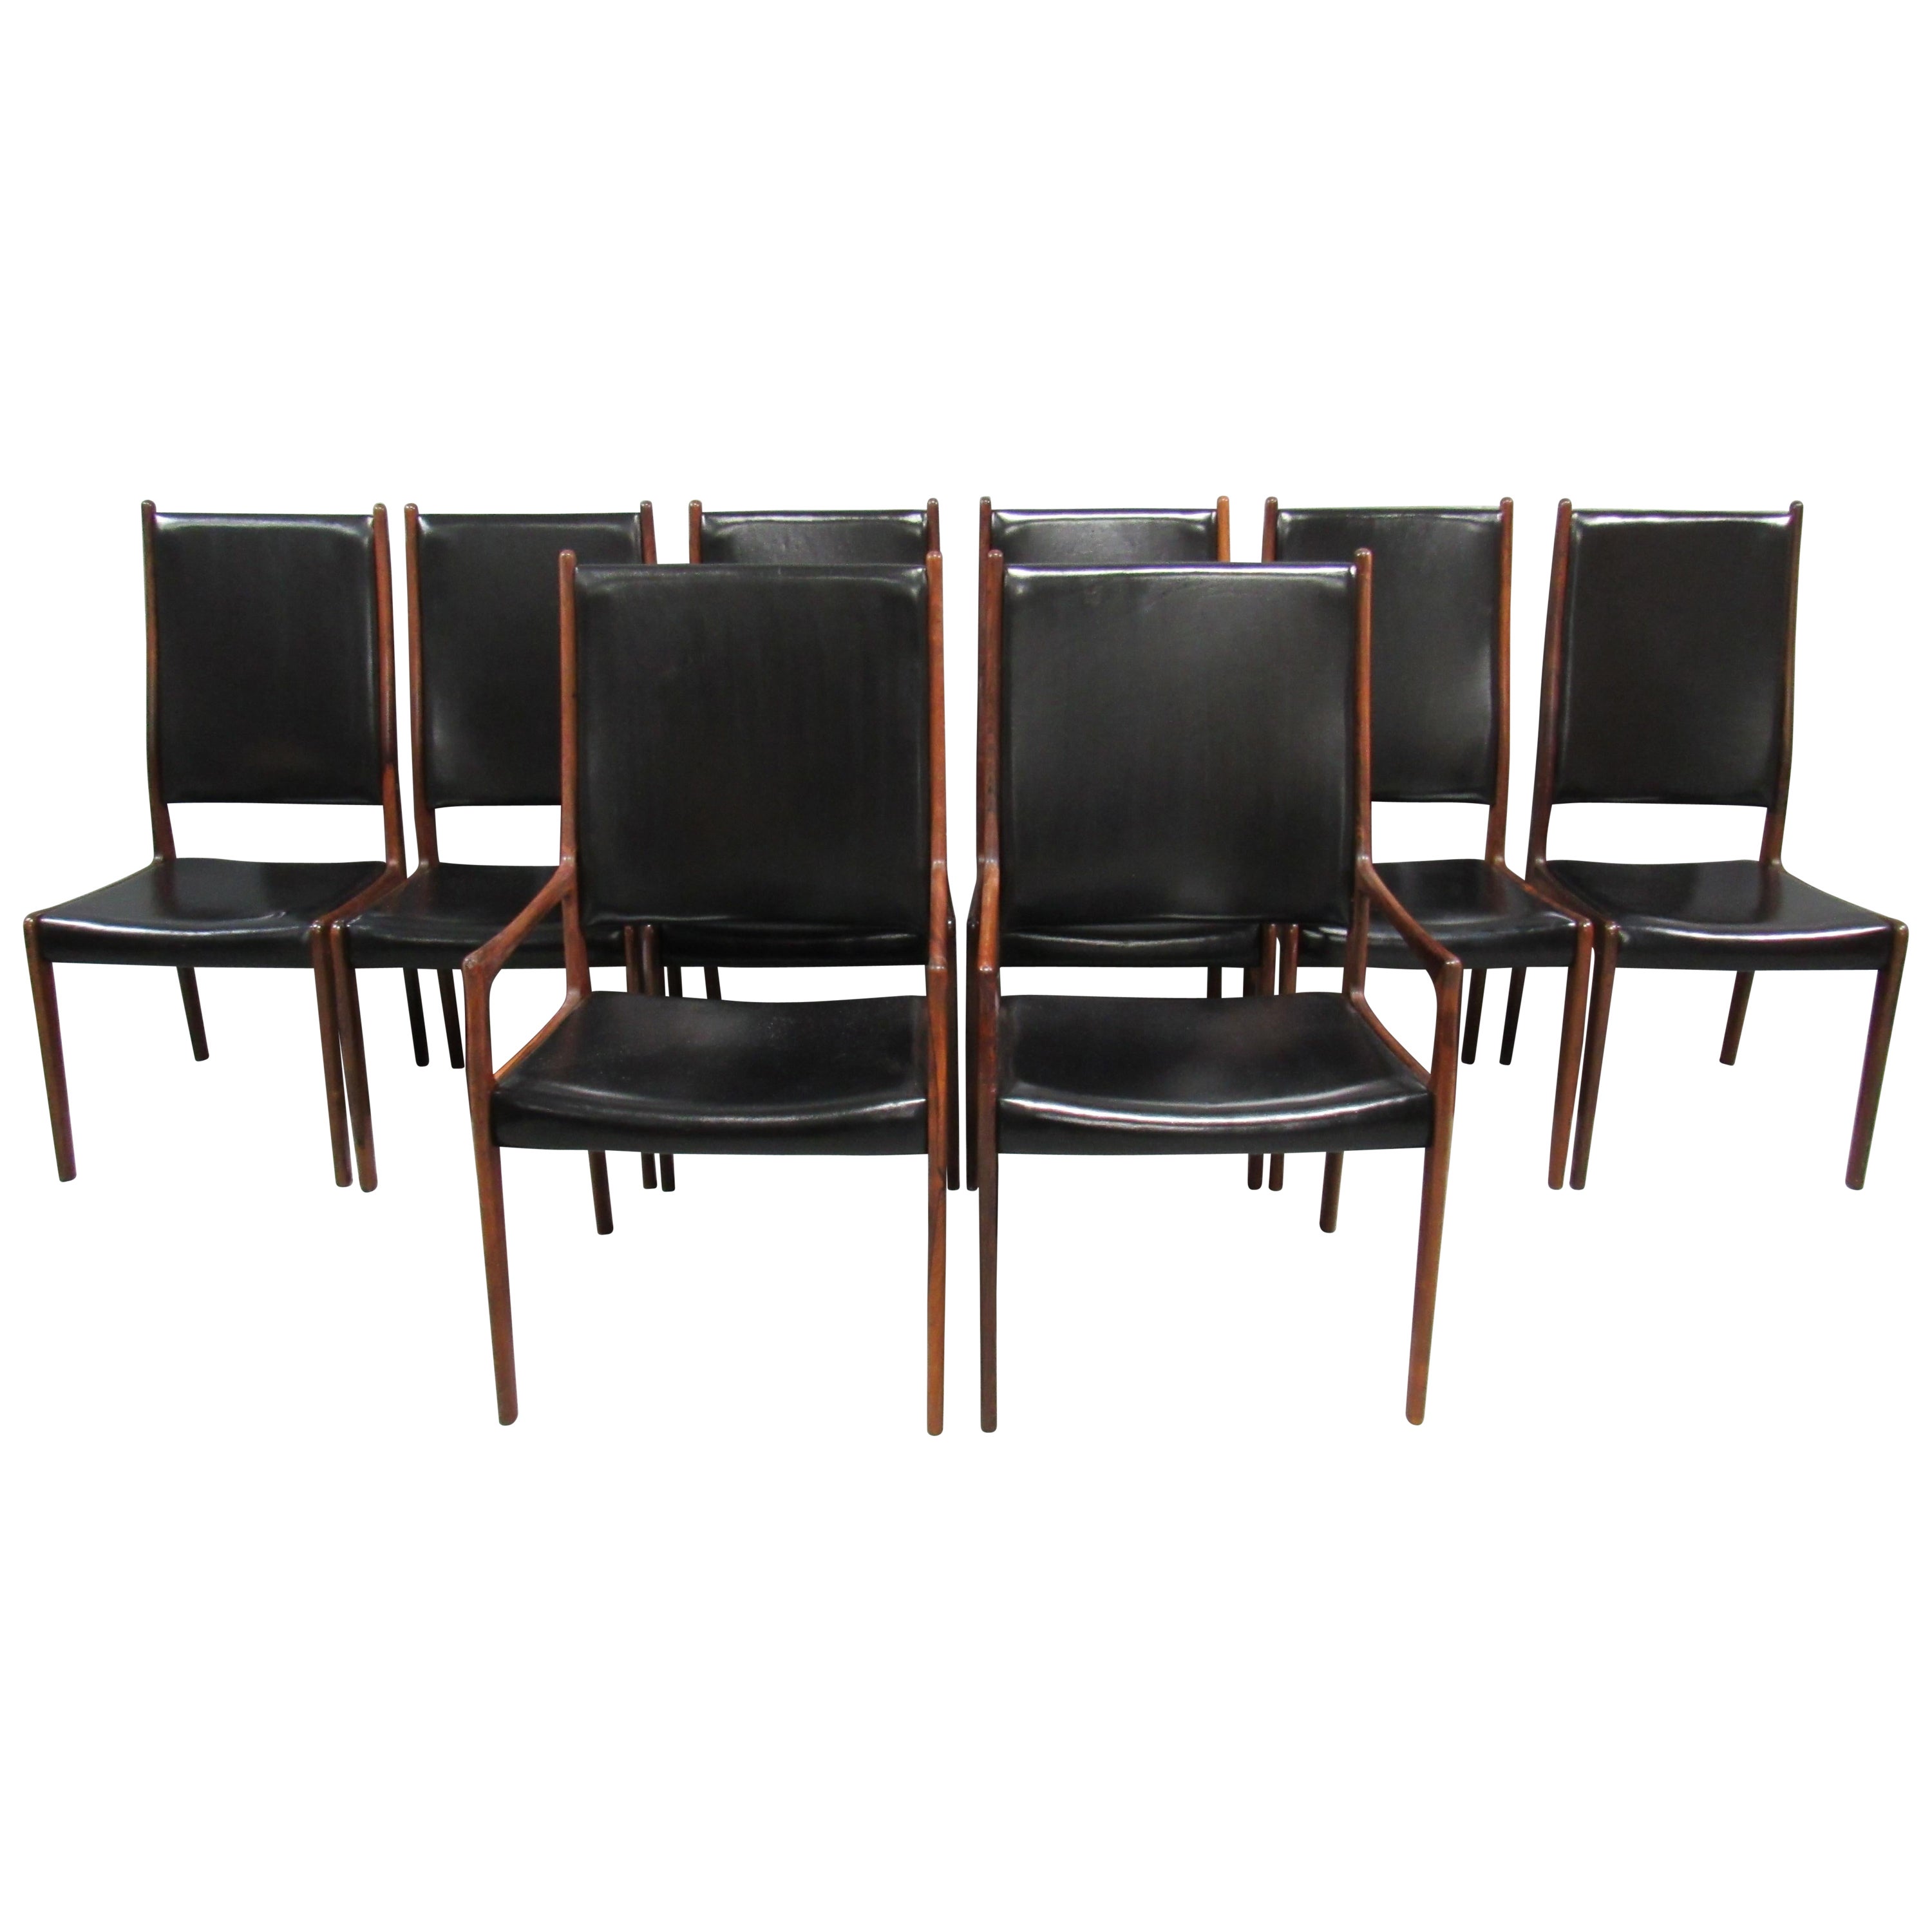 Set of 8 Mid-Century Danish Modern Rosewood Dining Chairs by Johannes Andersen For Sale